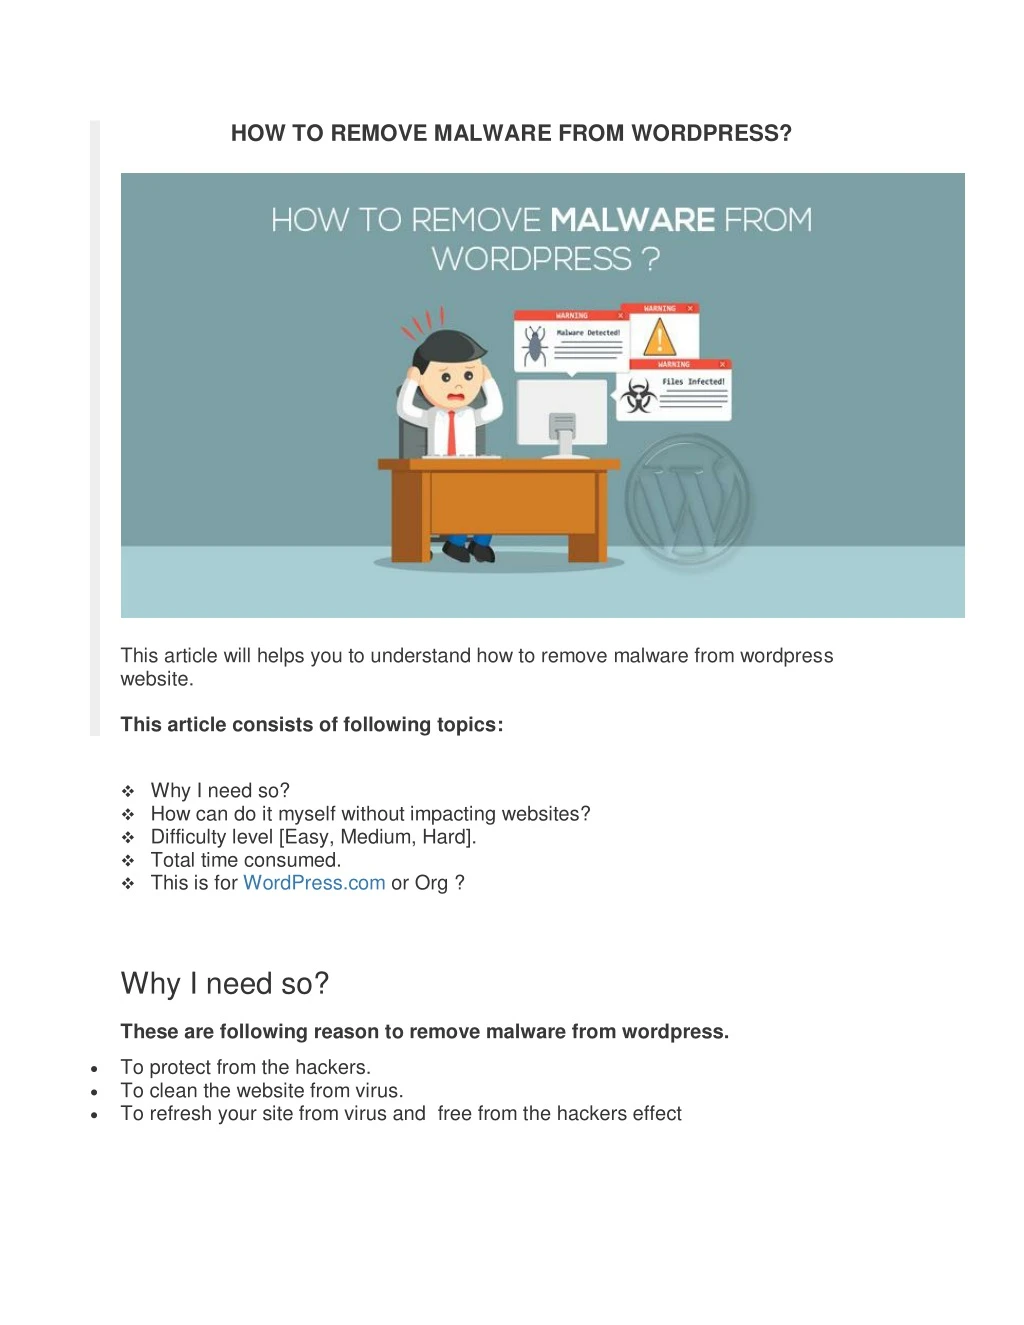 how to remove malware from wordpress